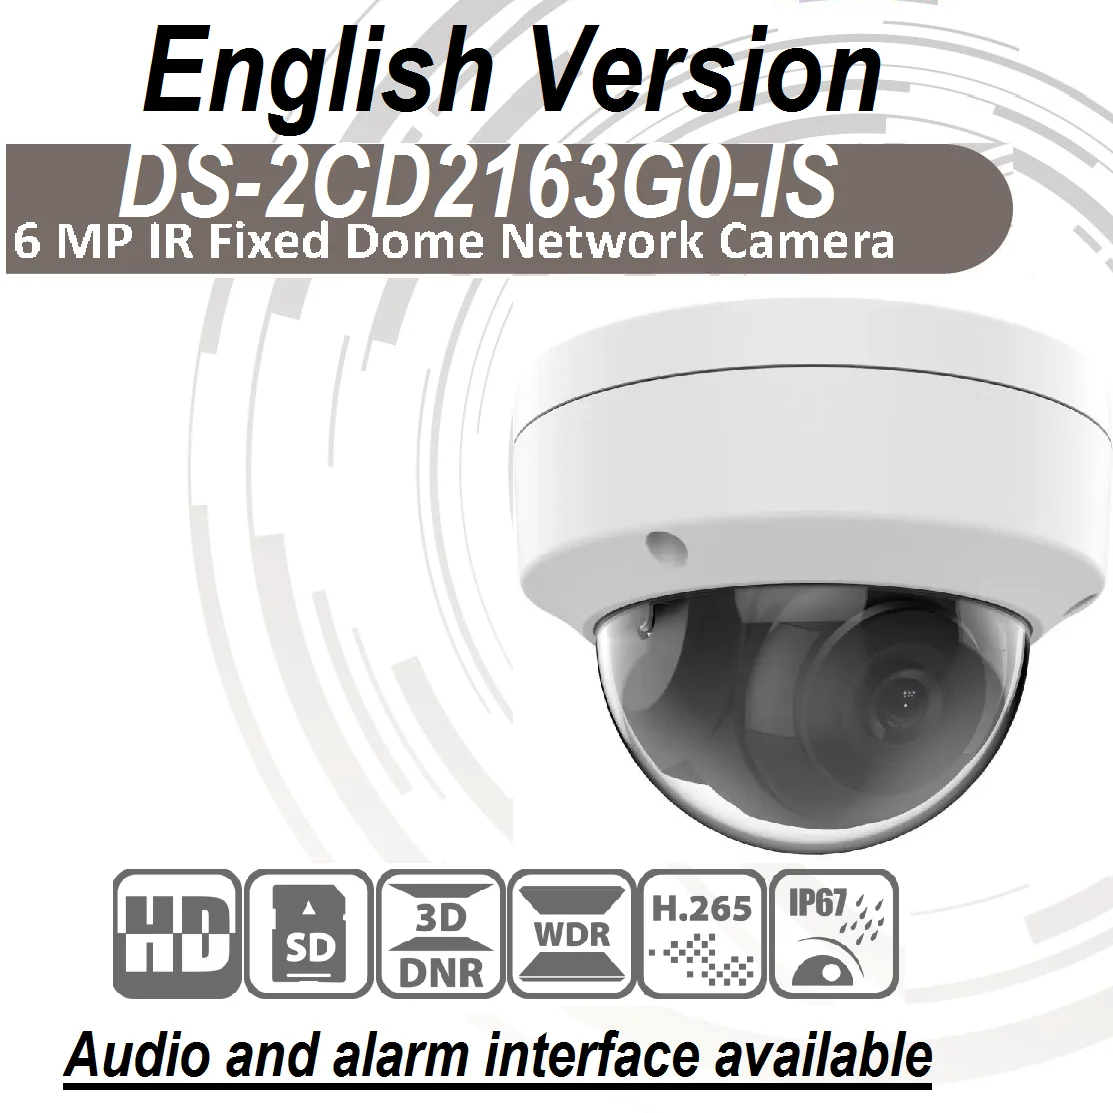 

DS-2CD2163G0-IS Overseas English Version 6 MP Outdoor WDR Fixed Dome Network Camera Support Audio PoE IR ONVIF Upgradeable